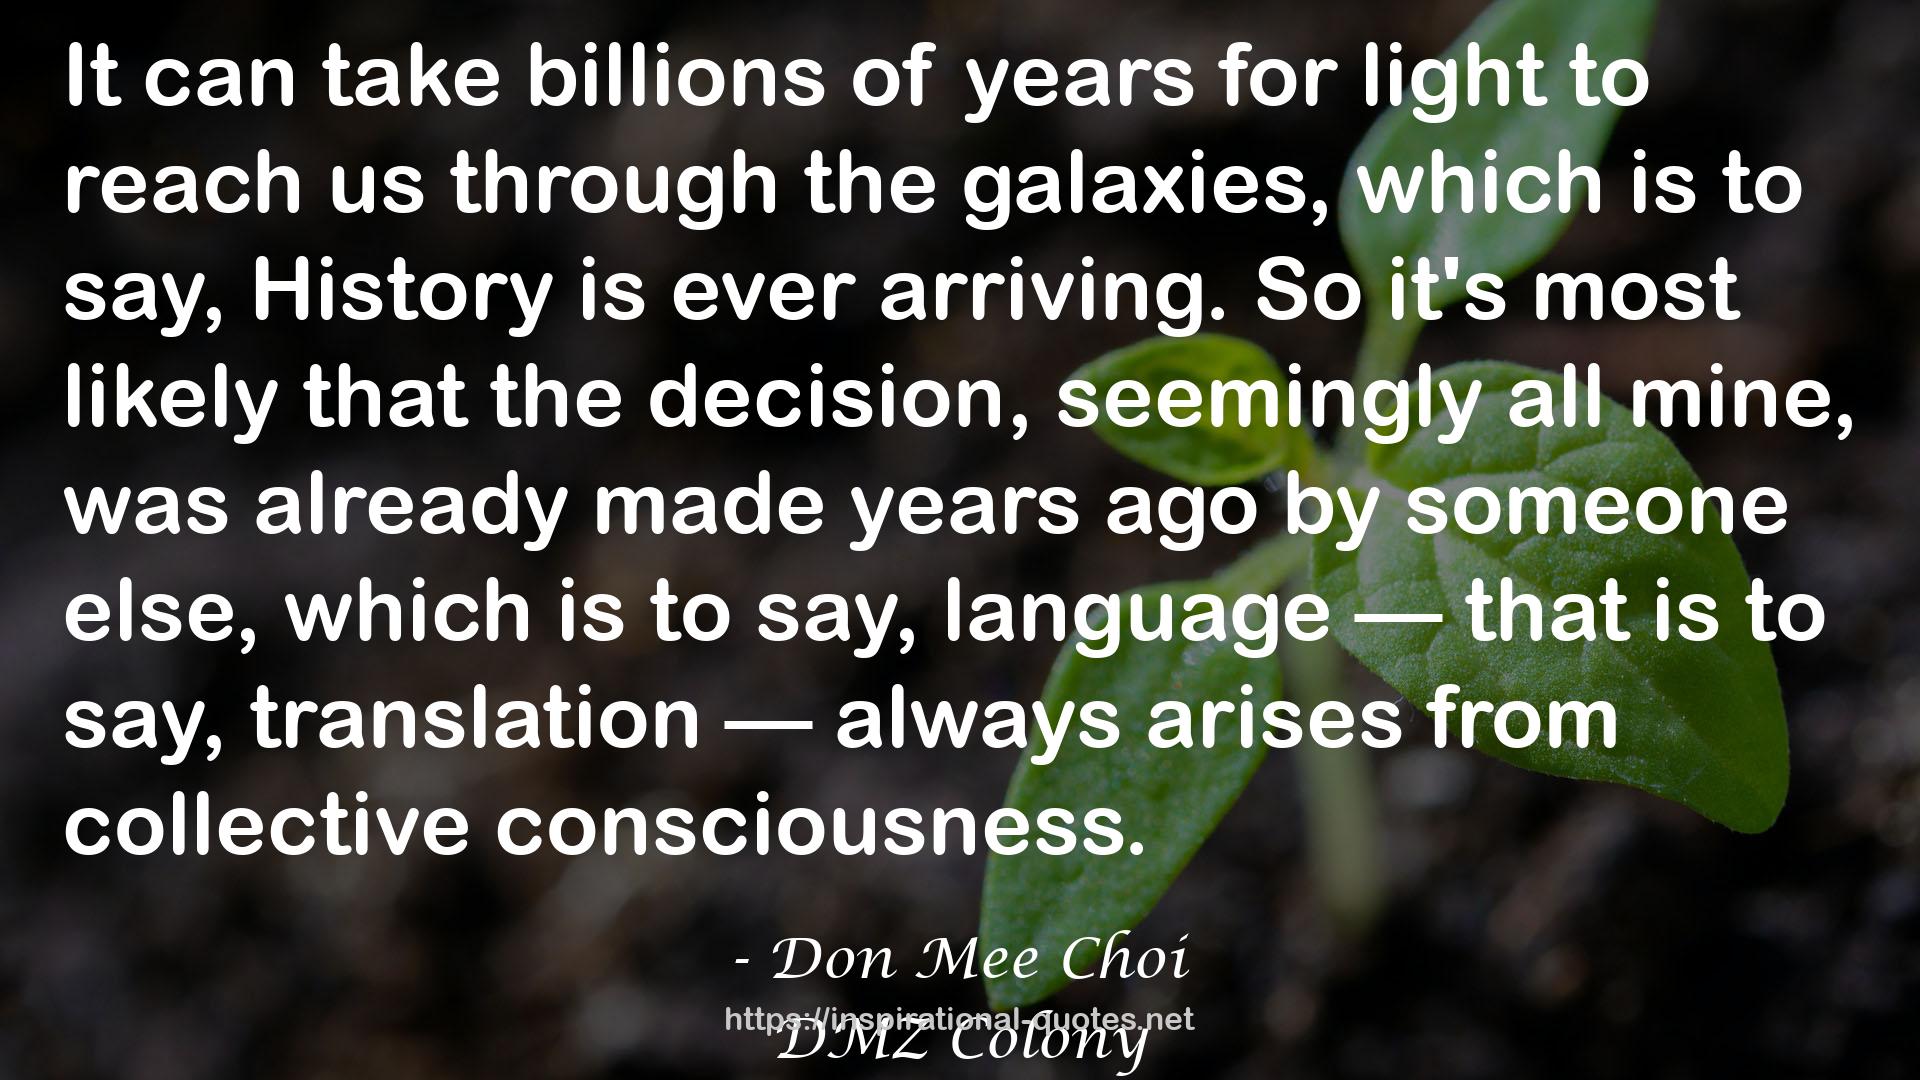 Don Mee Choi QUOTES